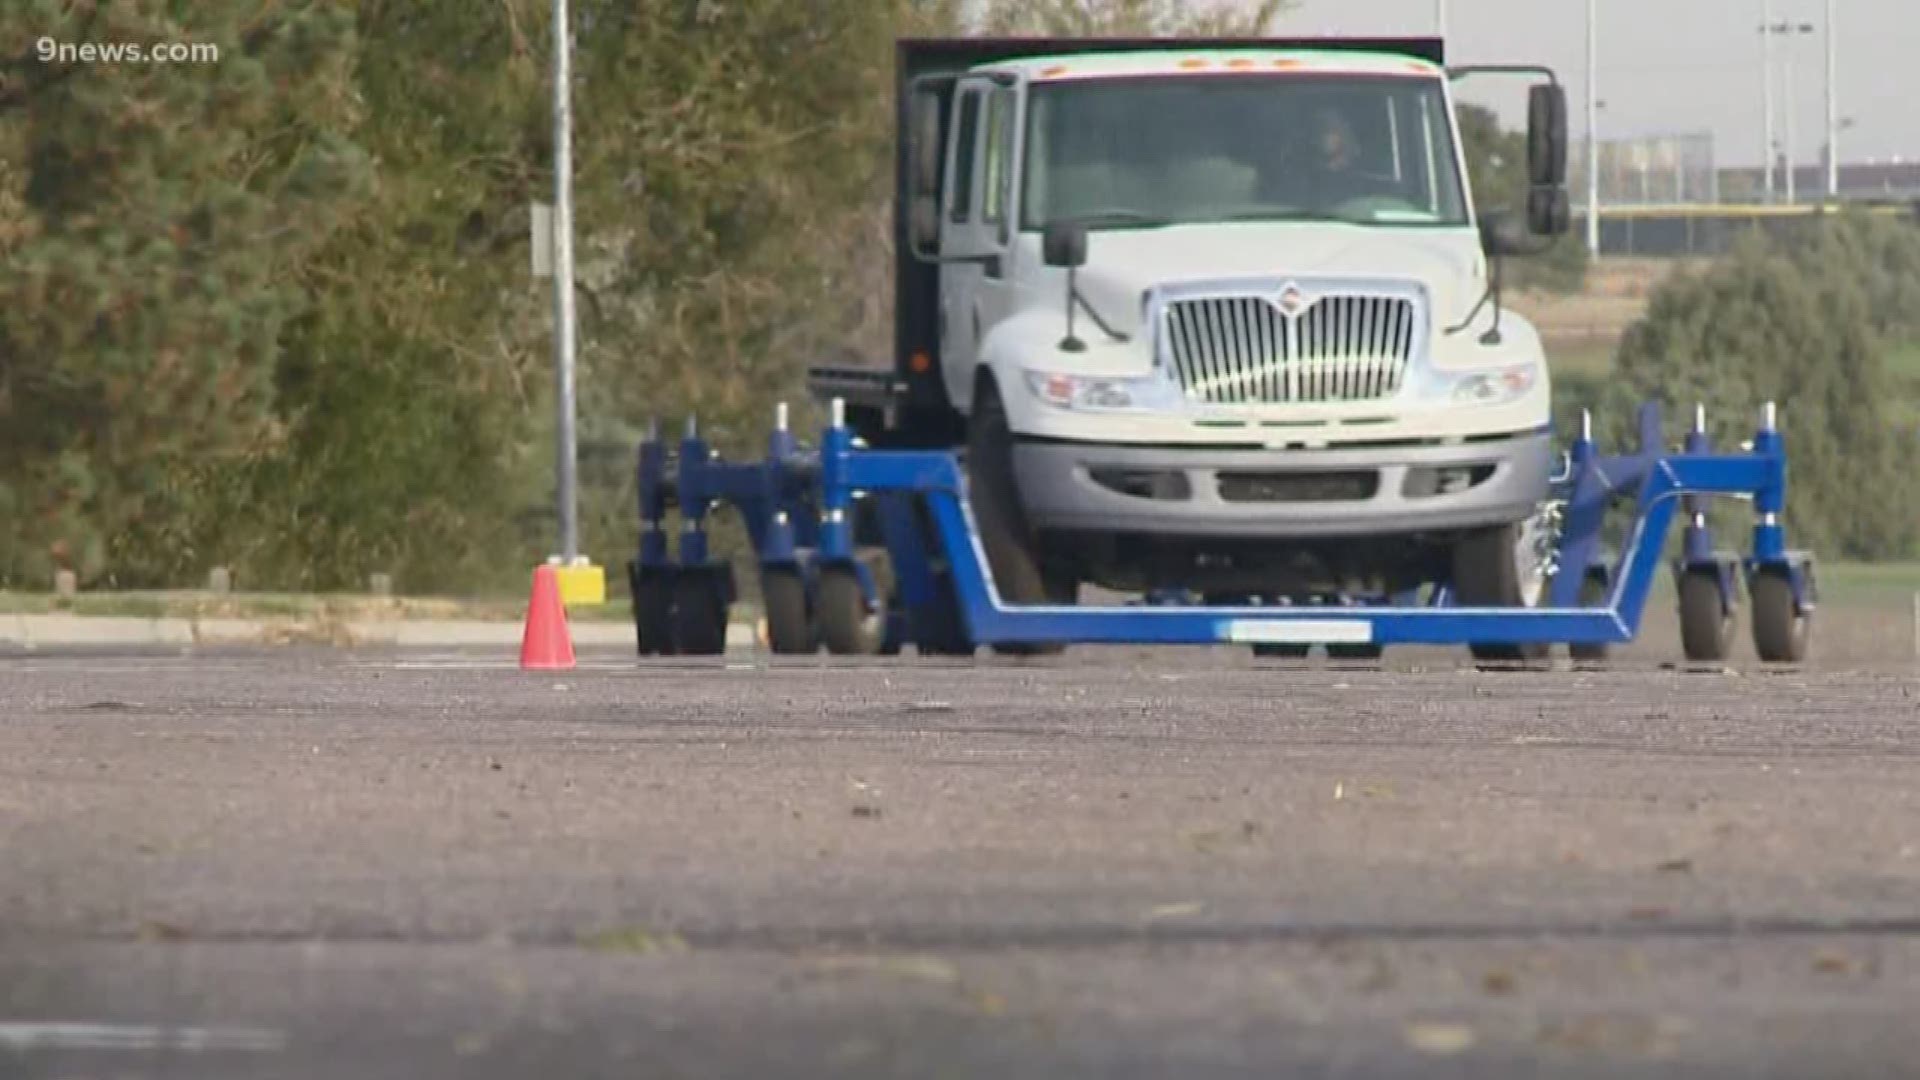 9NEWS' Matt Renoux took a lesson at the school teaching everyday drivers - and now semi-truck drivers.